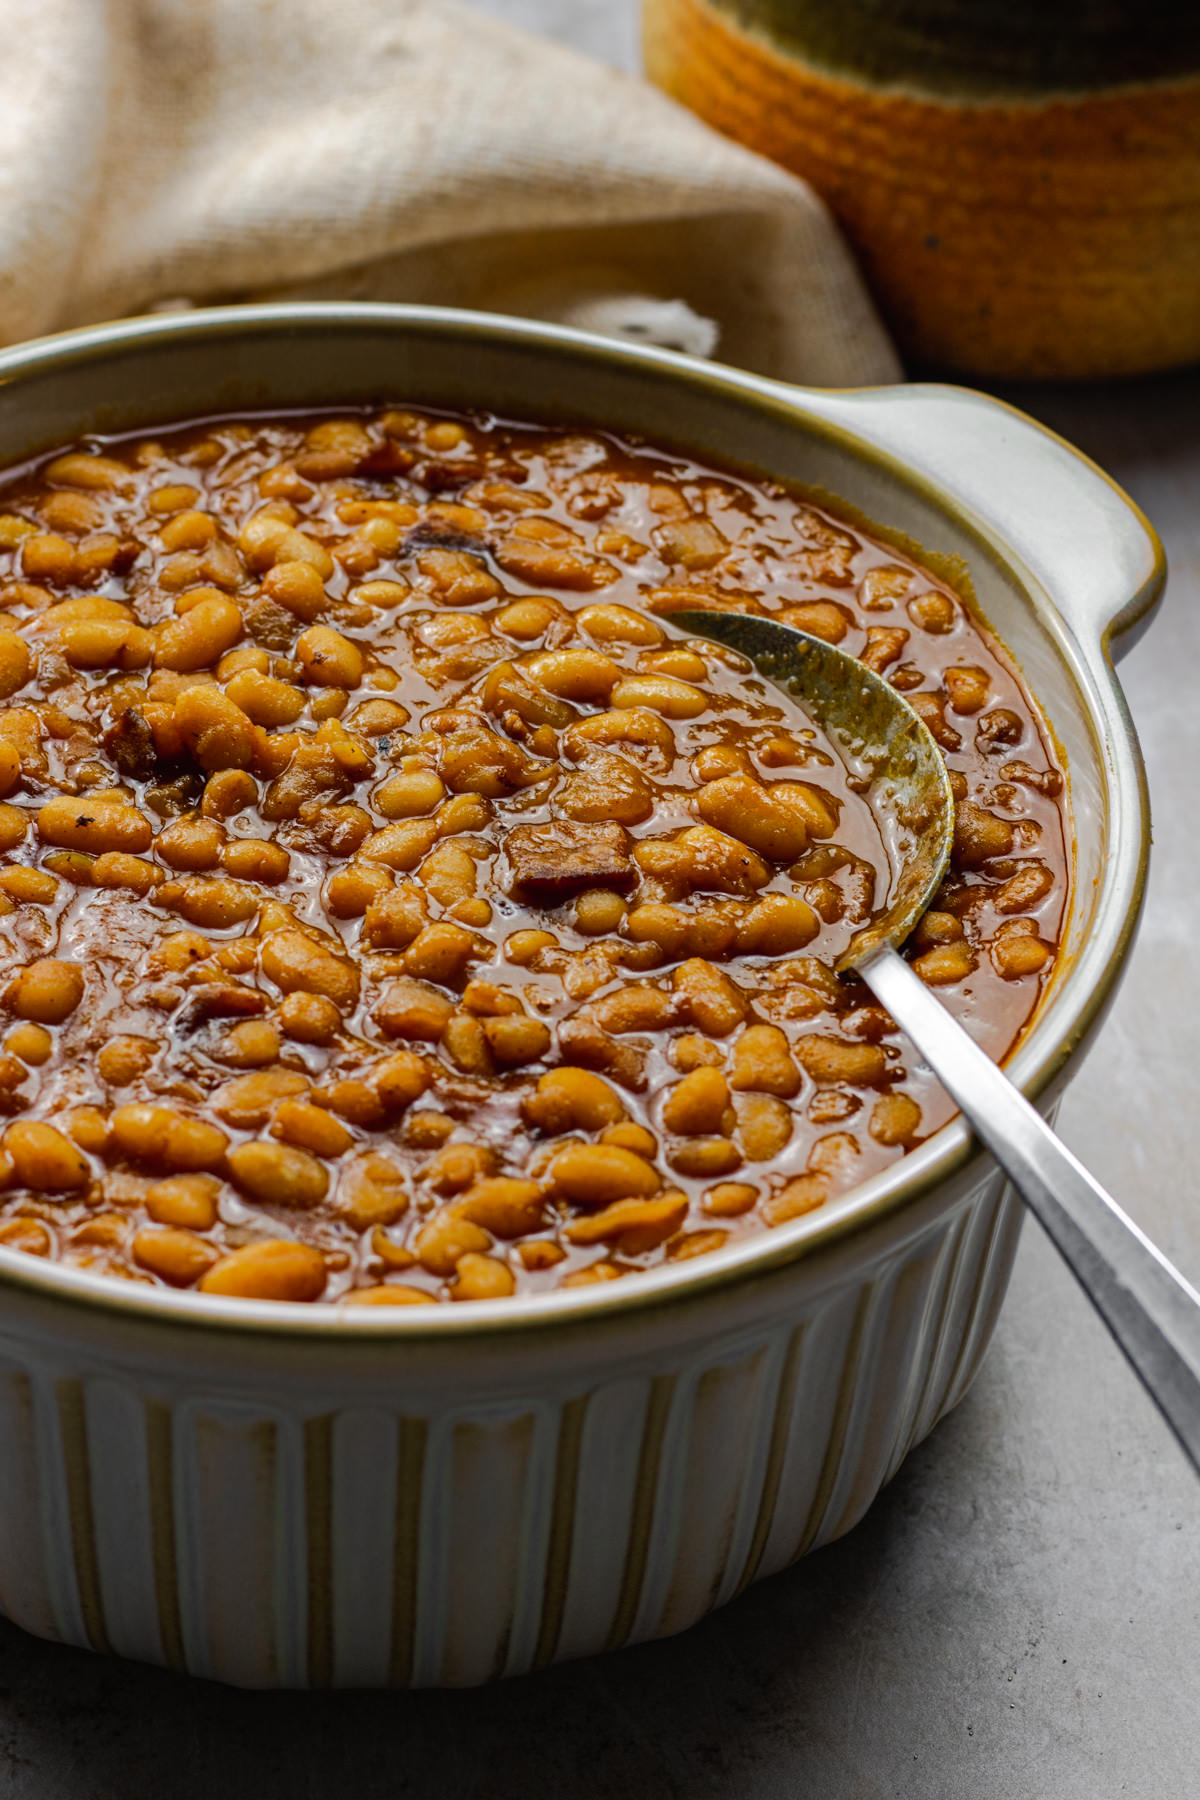 Three quarter view of baked beans recipe from scratch in a serving bowl